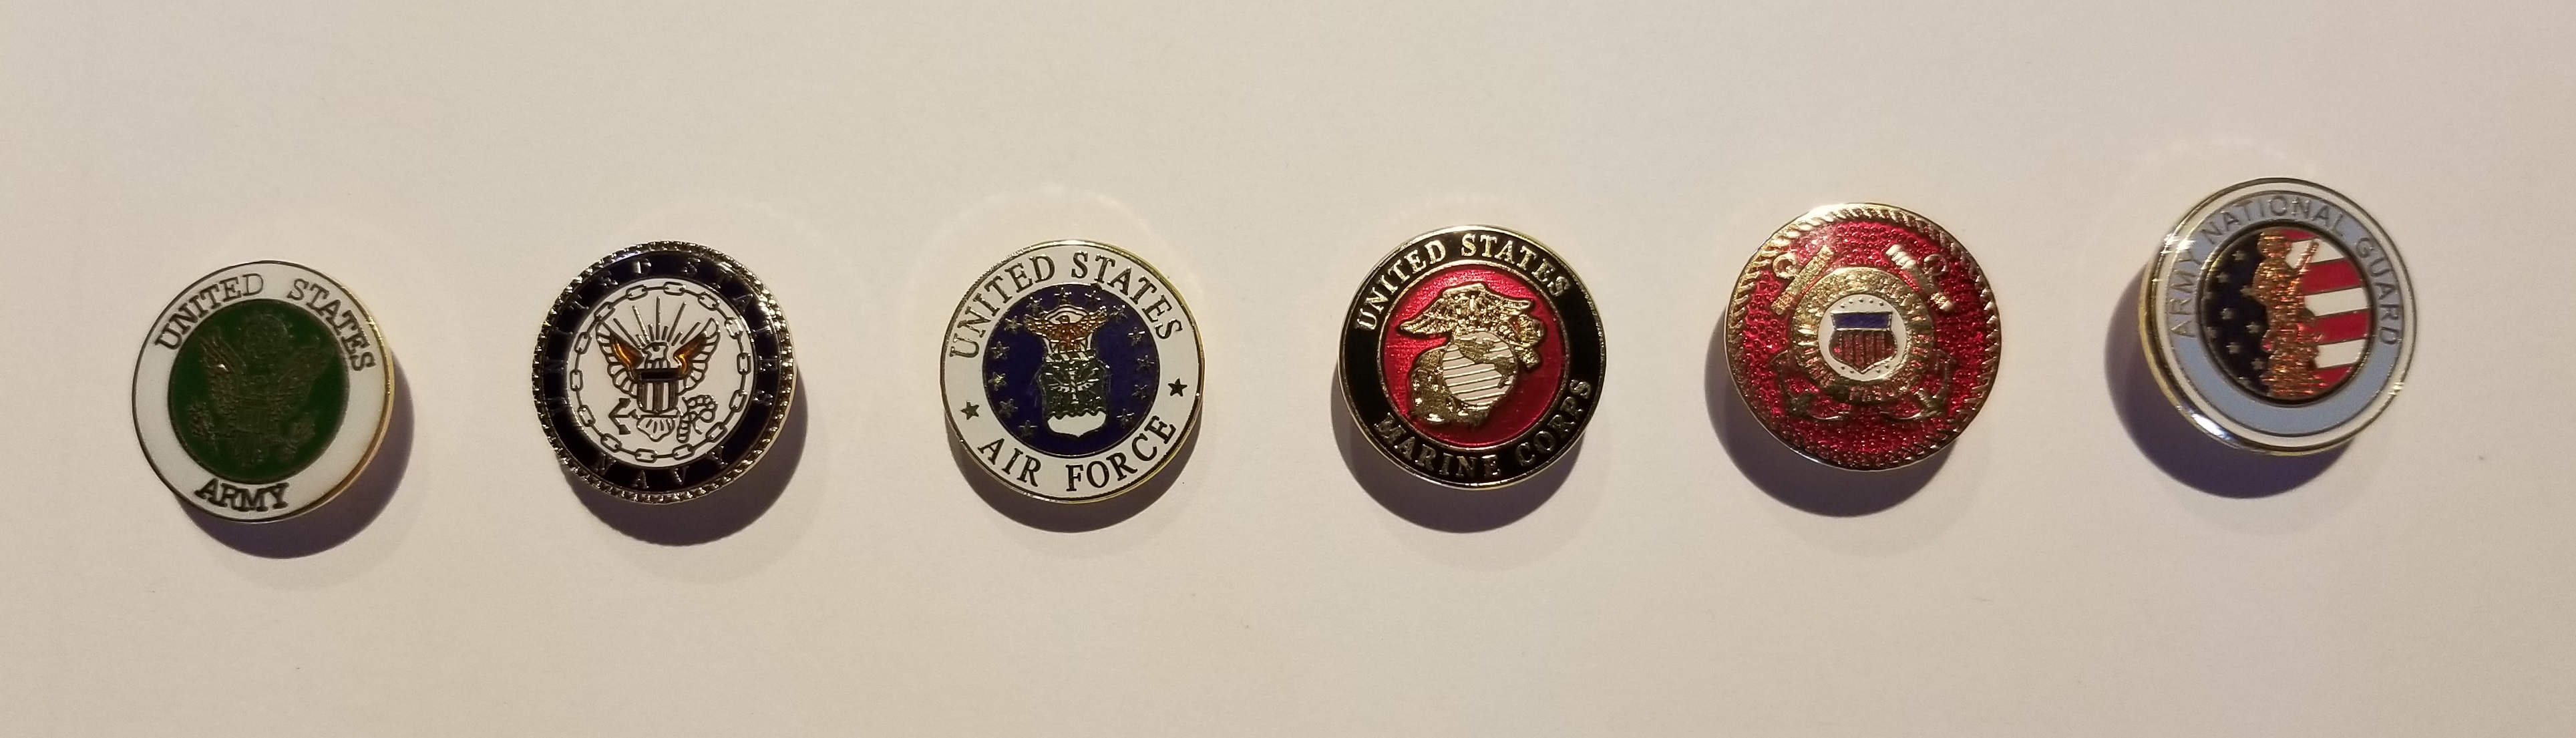 Military Branch Lapel Pins